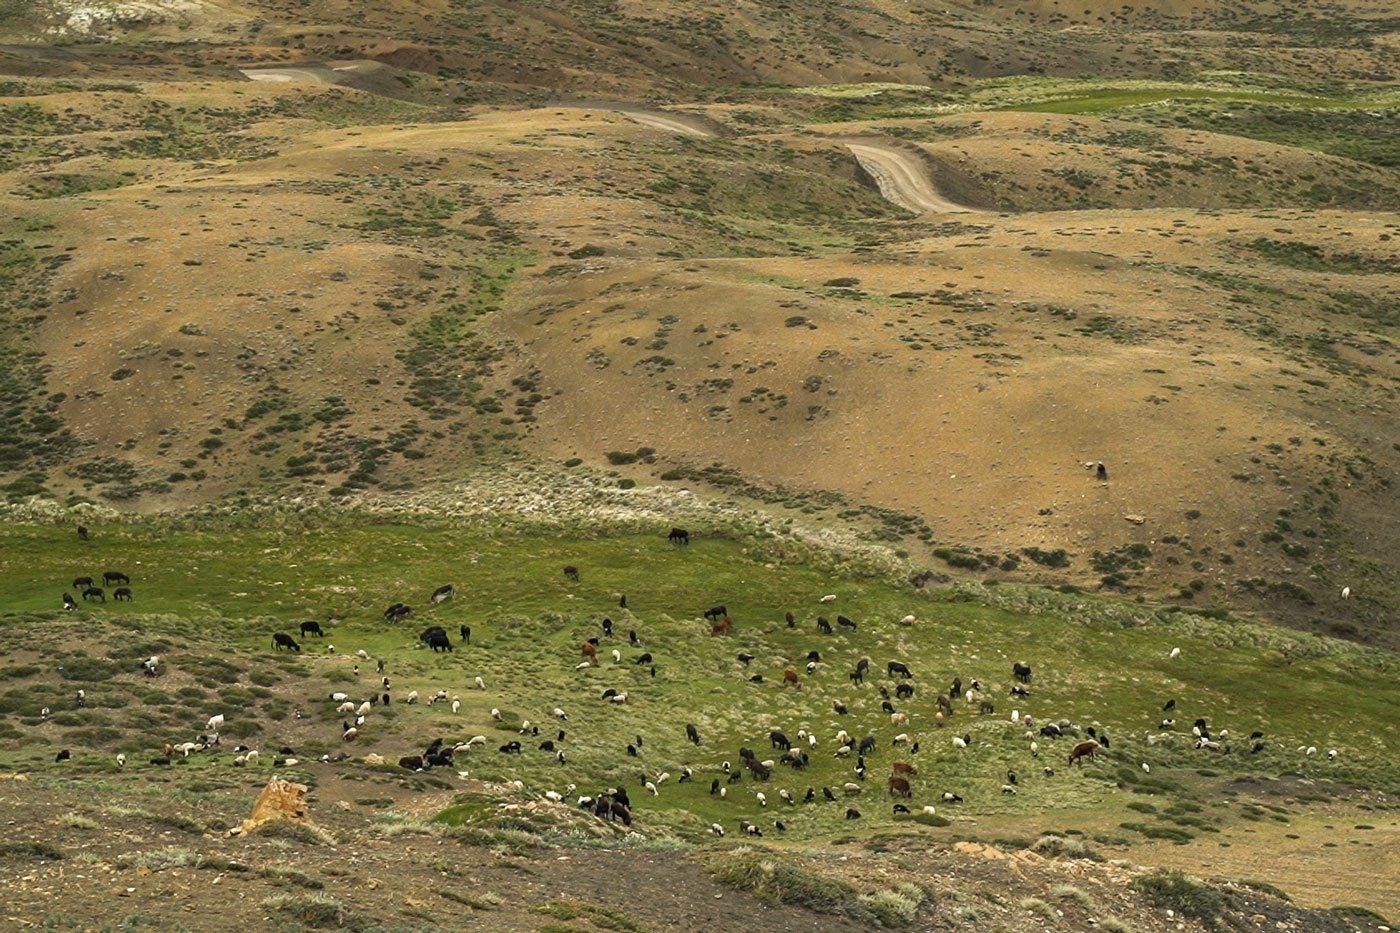 The village sheep, goats, cattle and donkeys moving towards high altitude areas in search of grazing grounds